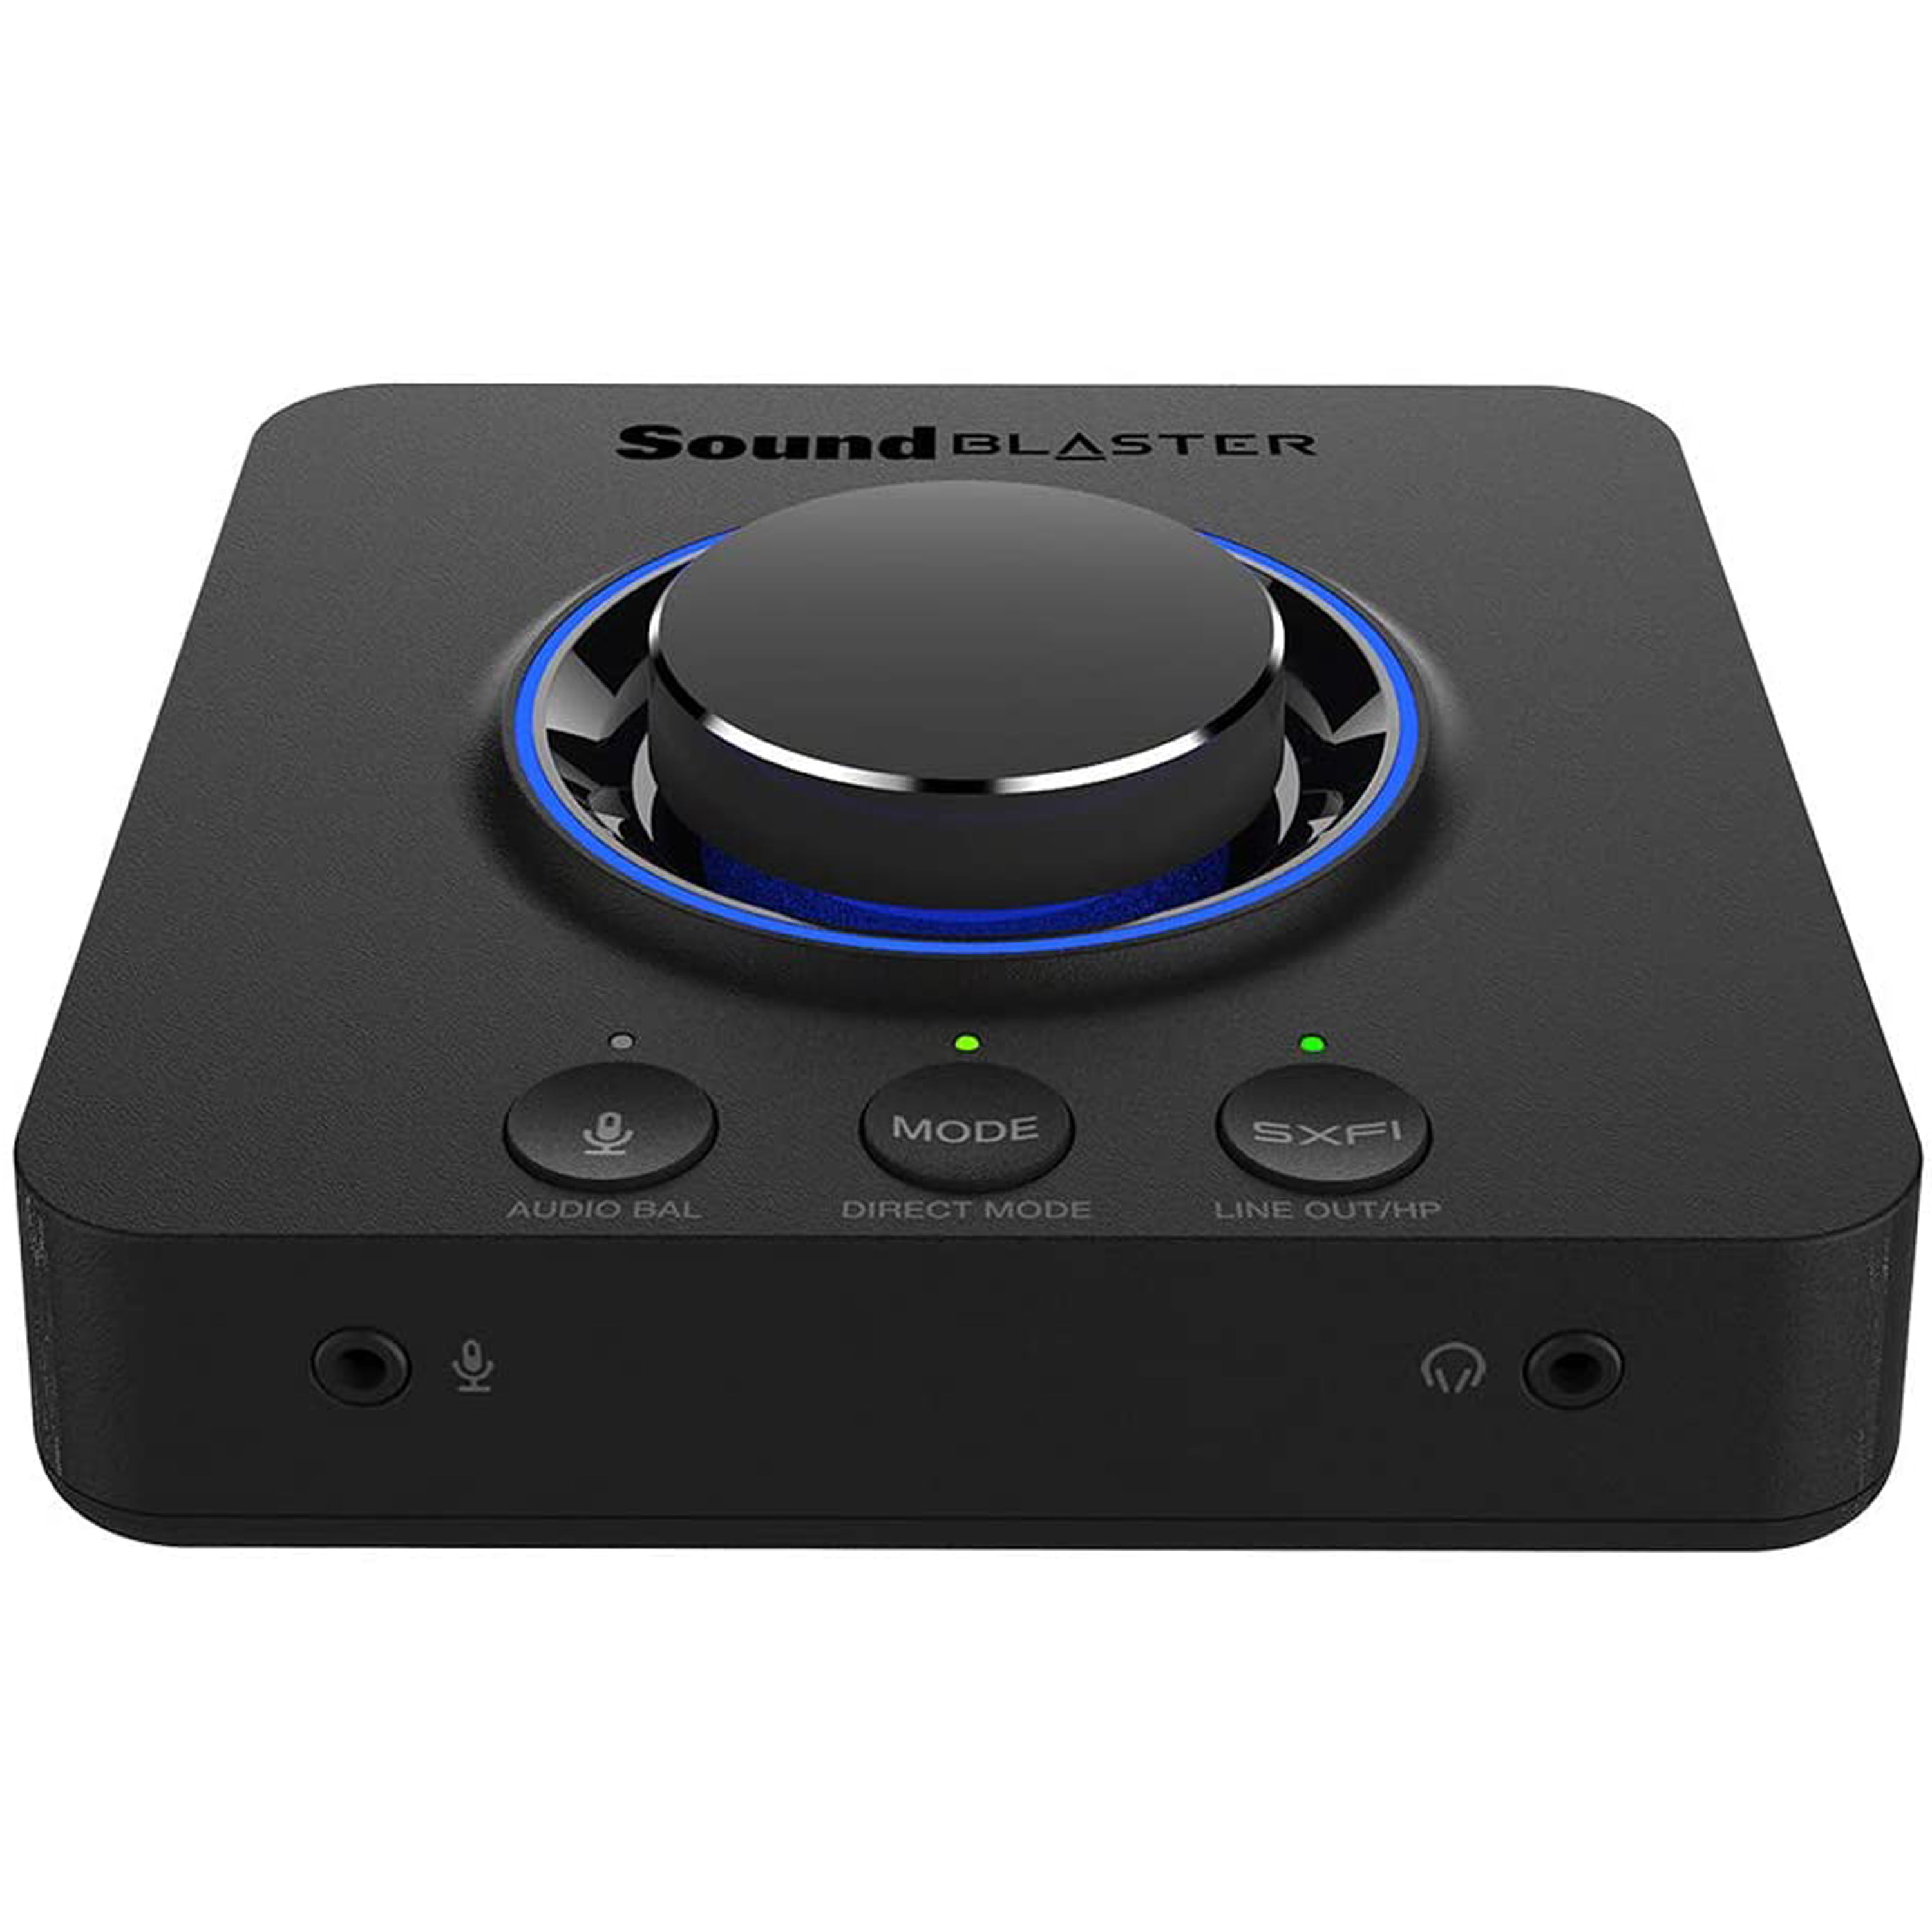 Creative Labs Sound Blaster X3 Hi-res 7.1 External USB DAC and Amp Sound  Card with Super X-Fi for PC and Mac